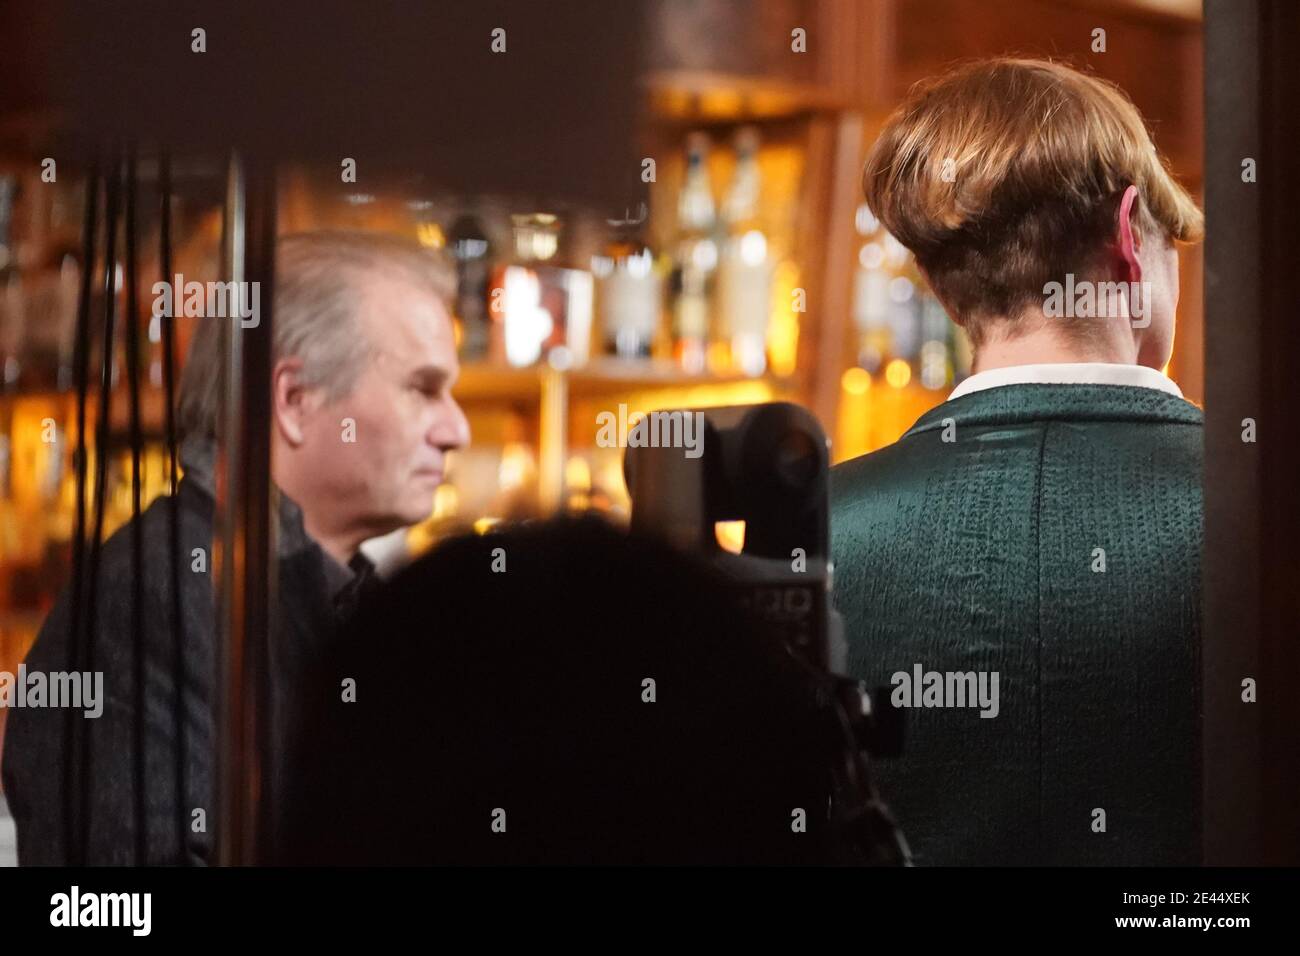 Berlin, Germany. 21st Jan, 2021. Lawyers Reiner Füllmich and Viviane  Fischer attend a party founding event at the "Scotch and Sofa" bar in  Prenzlauer Berg. A week after police were called in